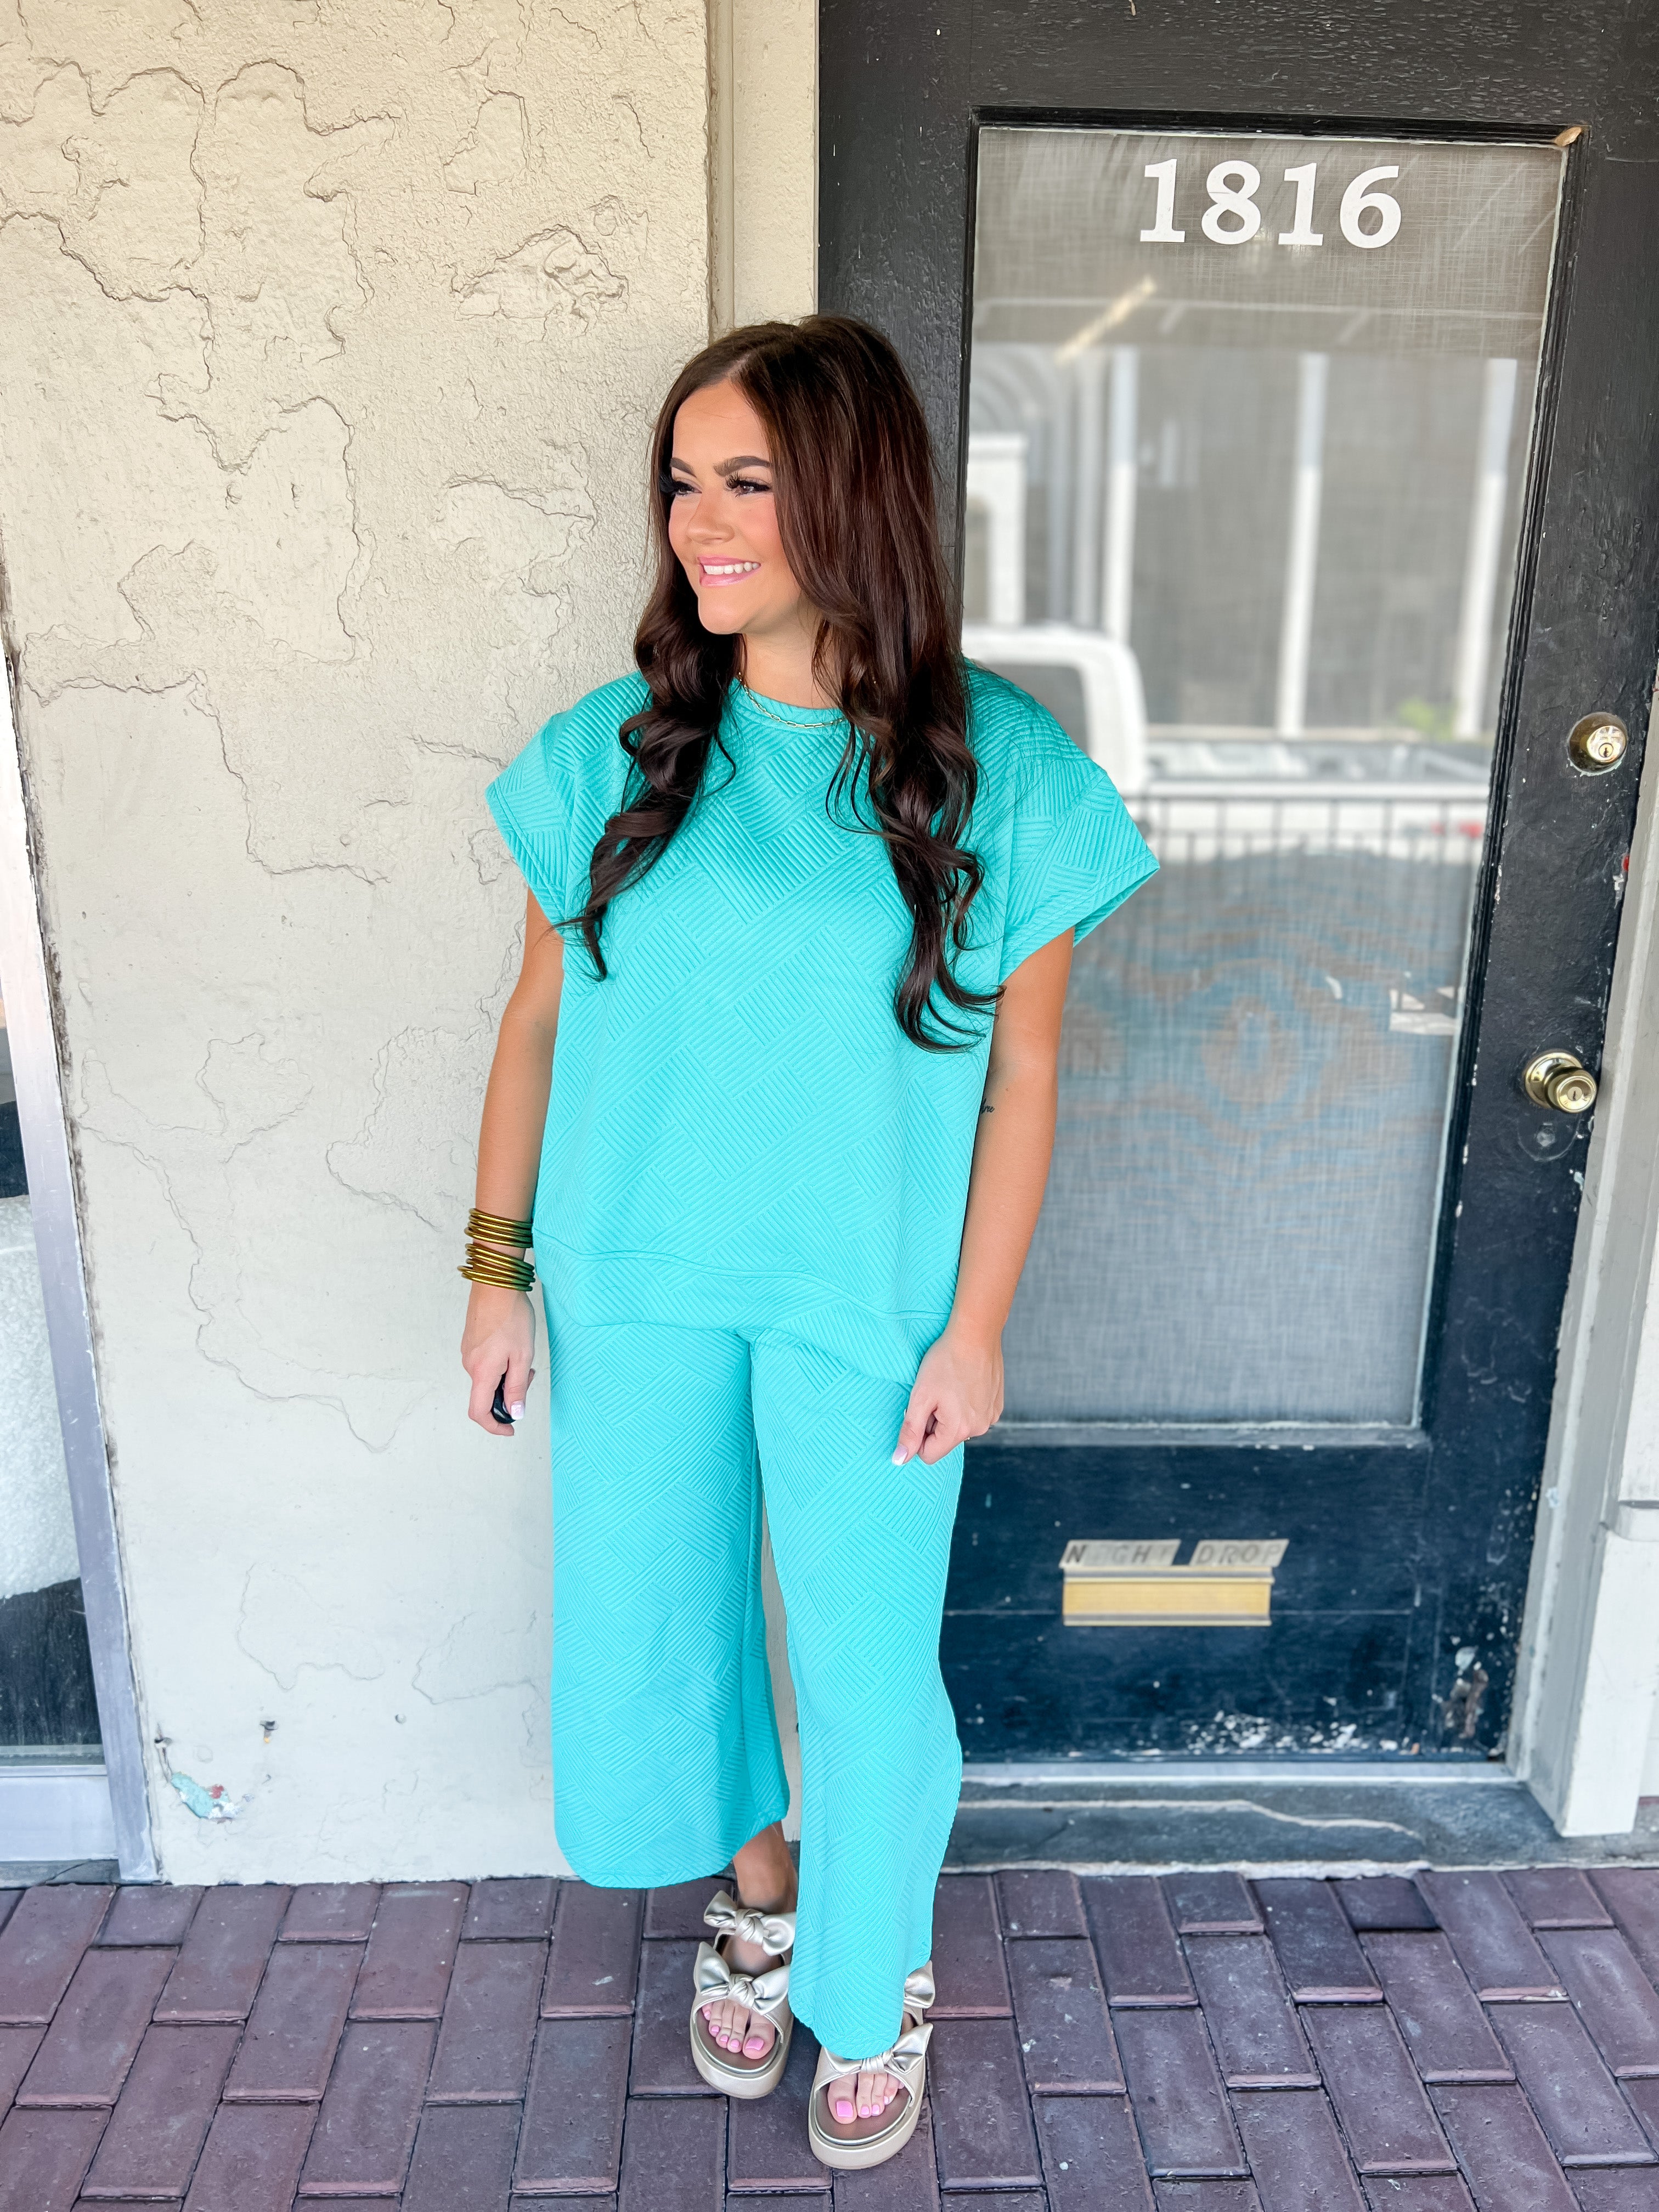 Textured Short Sleeve Turquoise Top